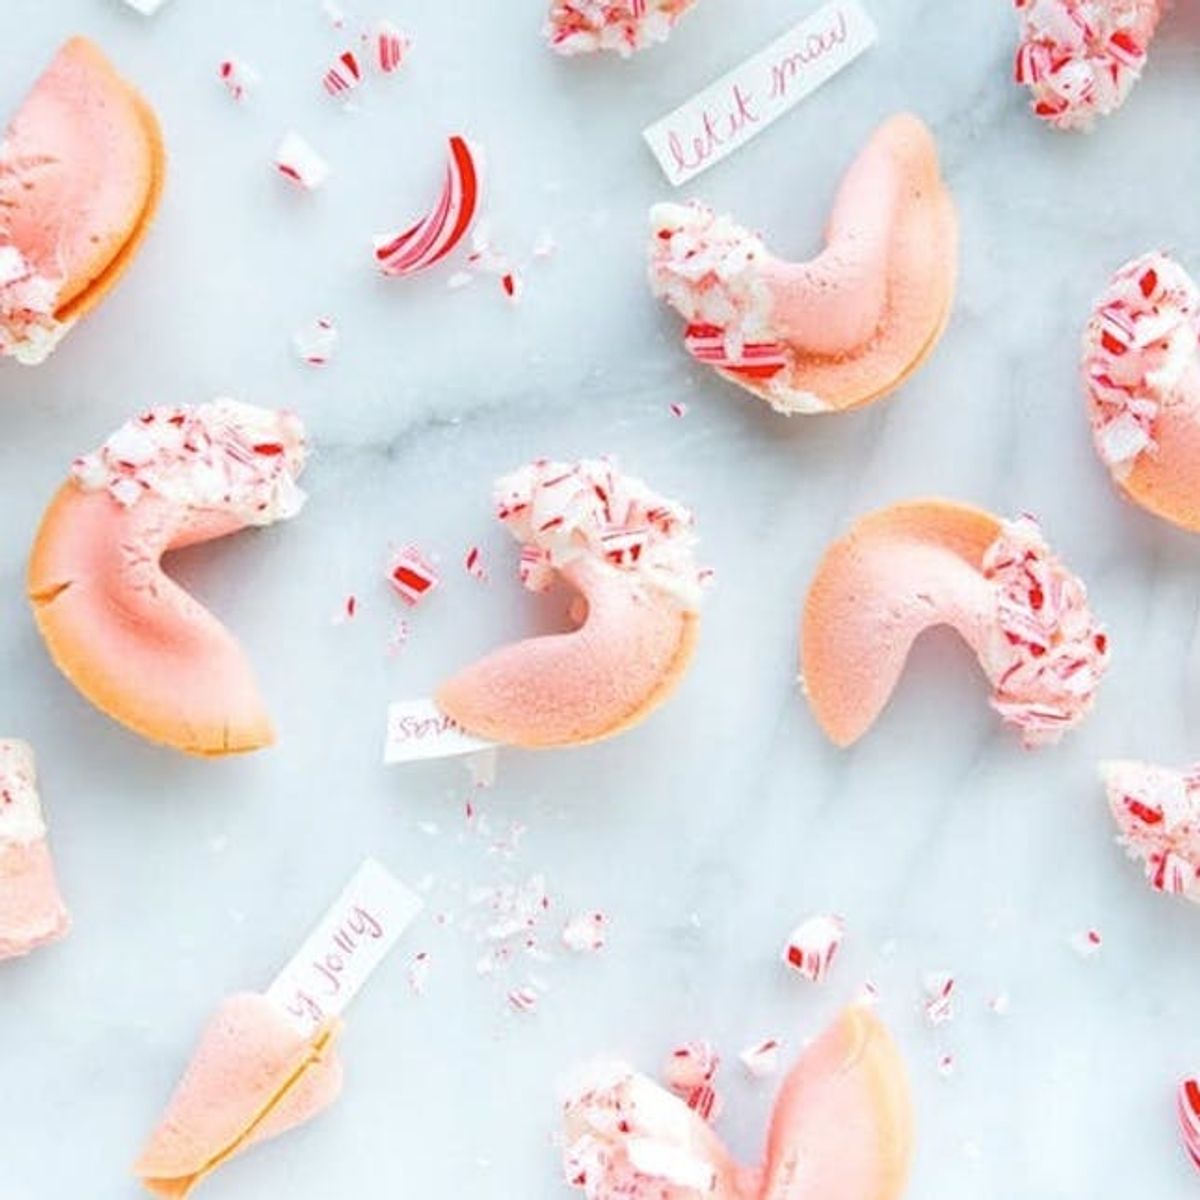 20 Creative Candy Cane Recipes to Make All of December